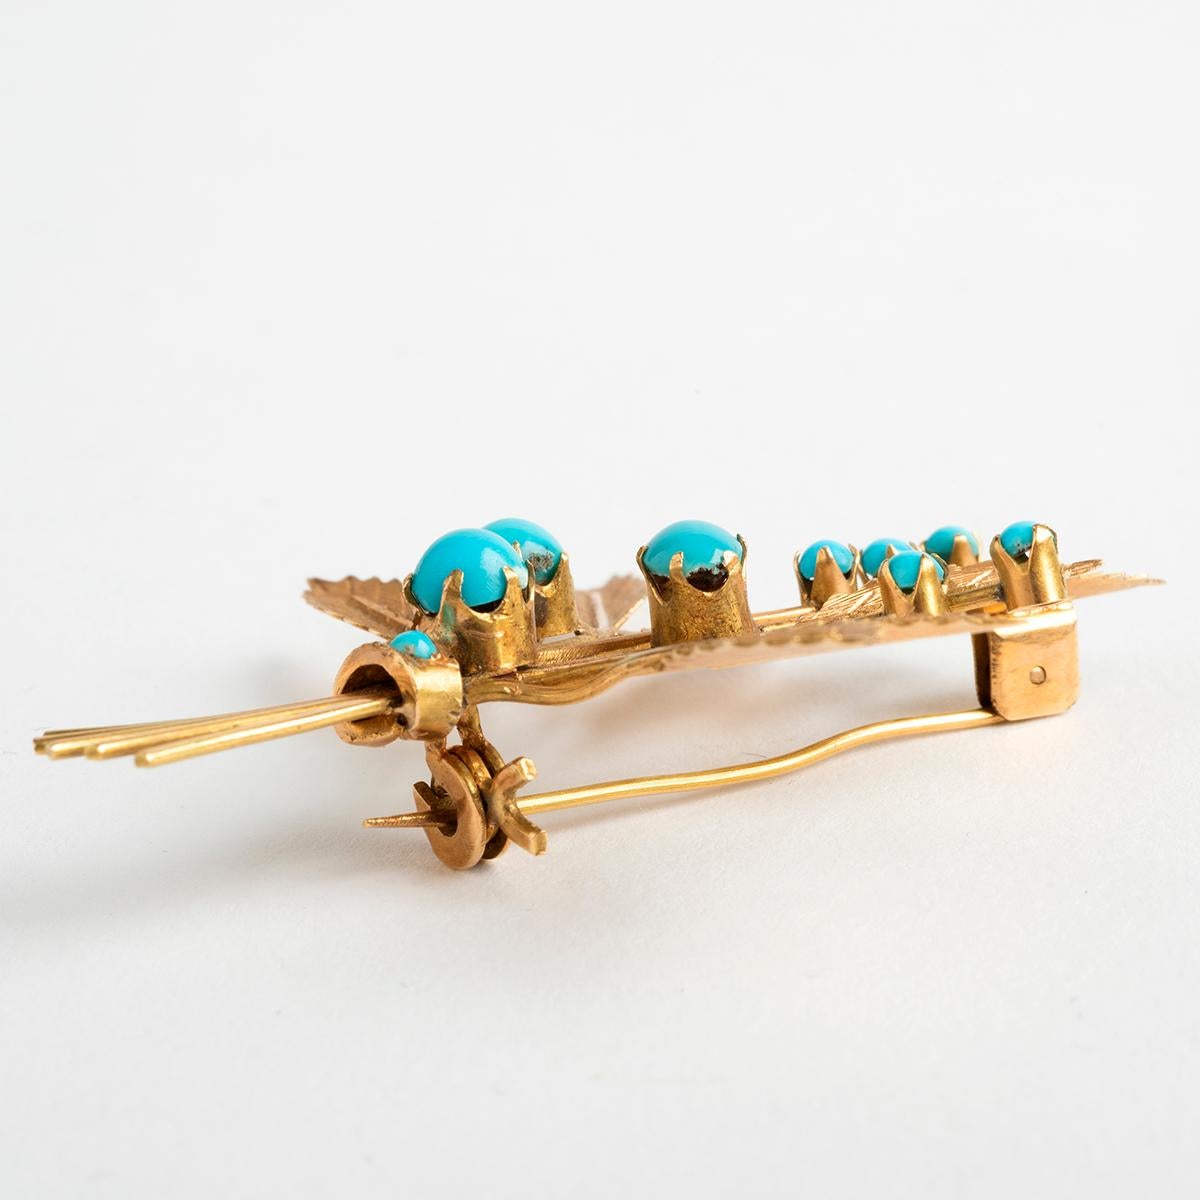 Oval Cut Wonderful Antique Turquoise and Gold Floral Spray Brooch, 15 Carat Yellow Gold